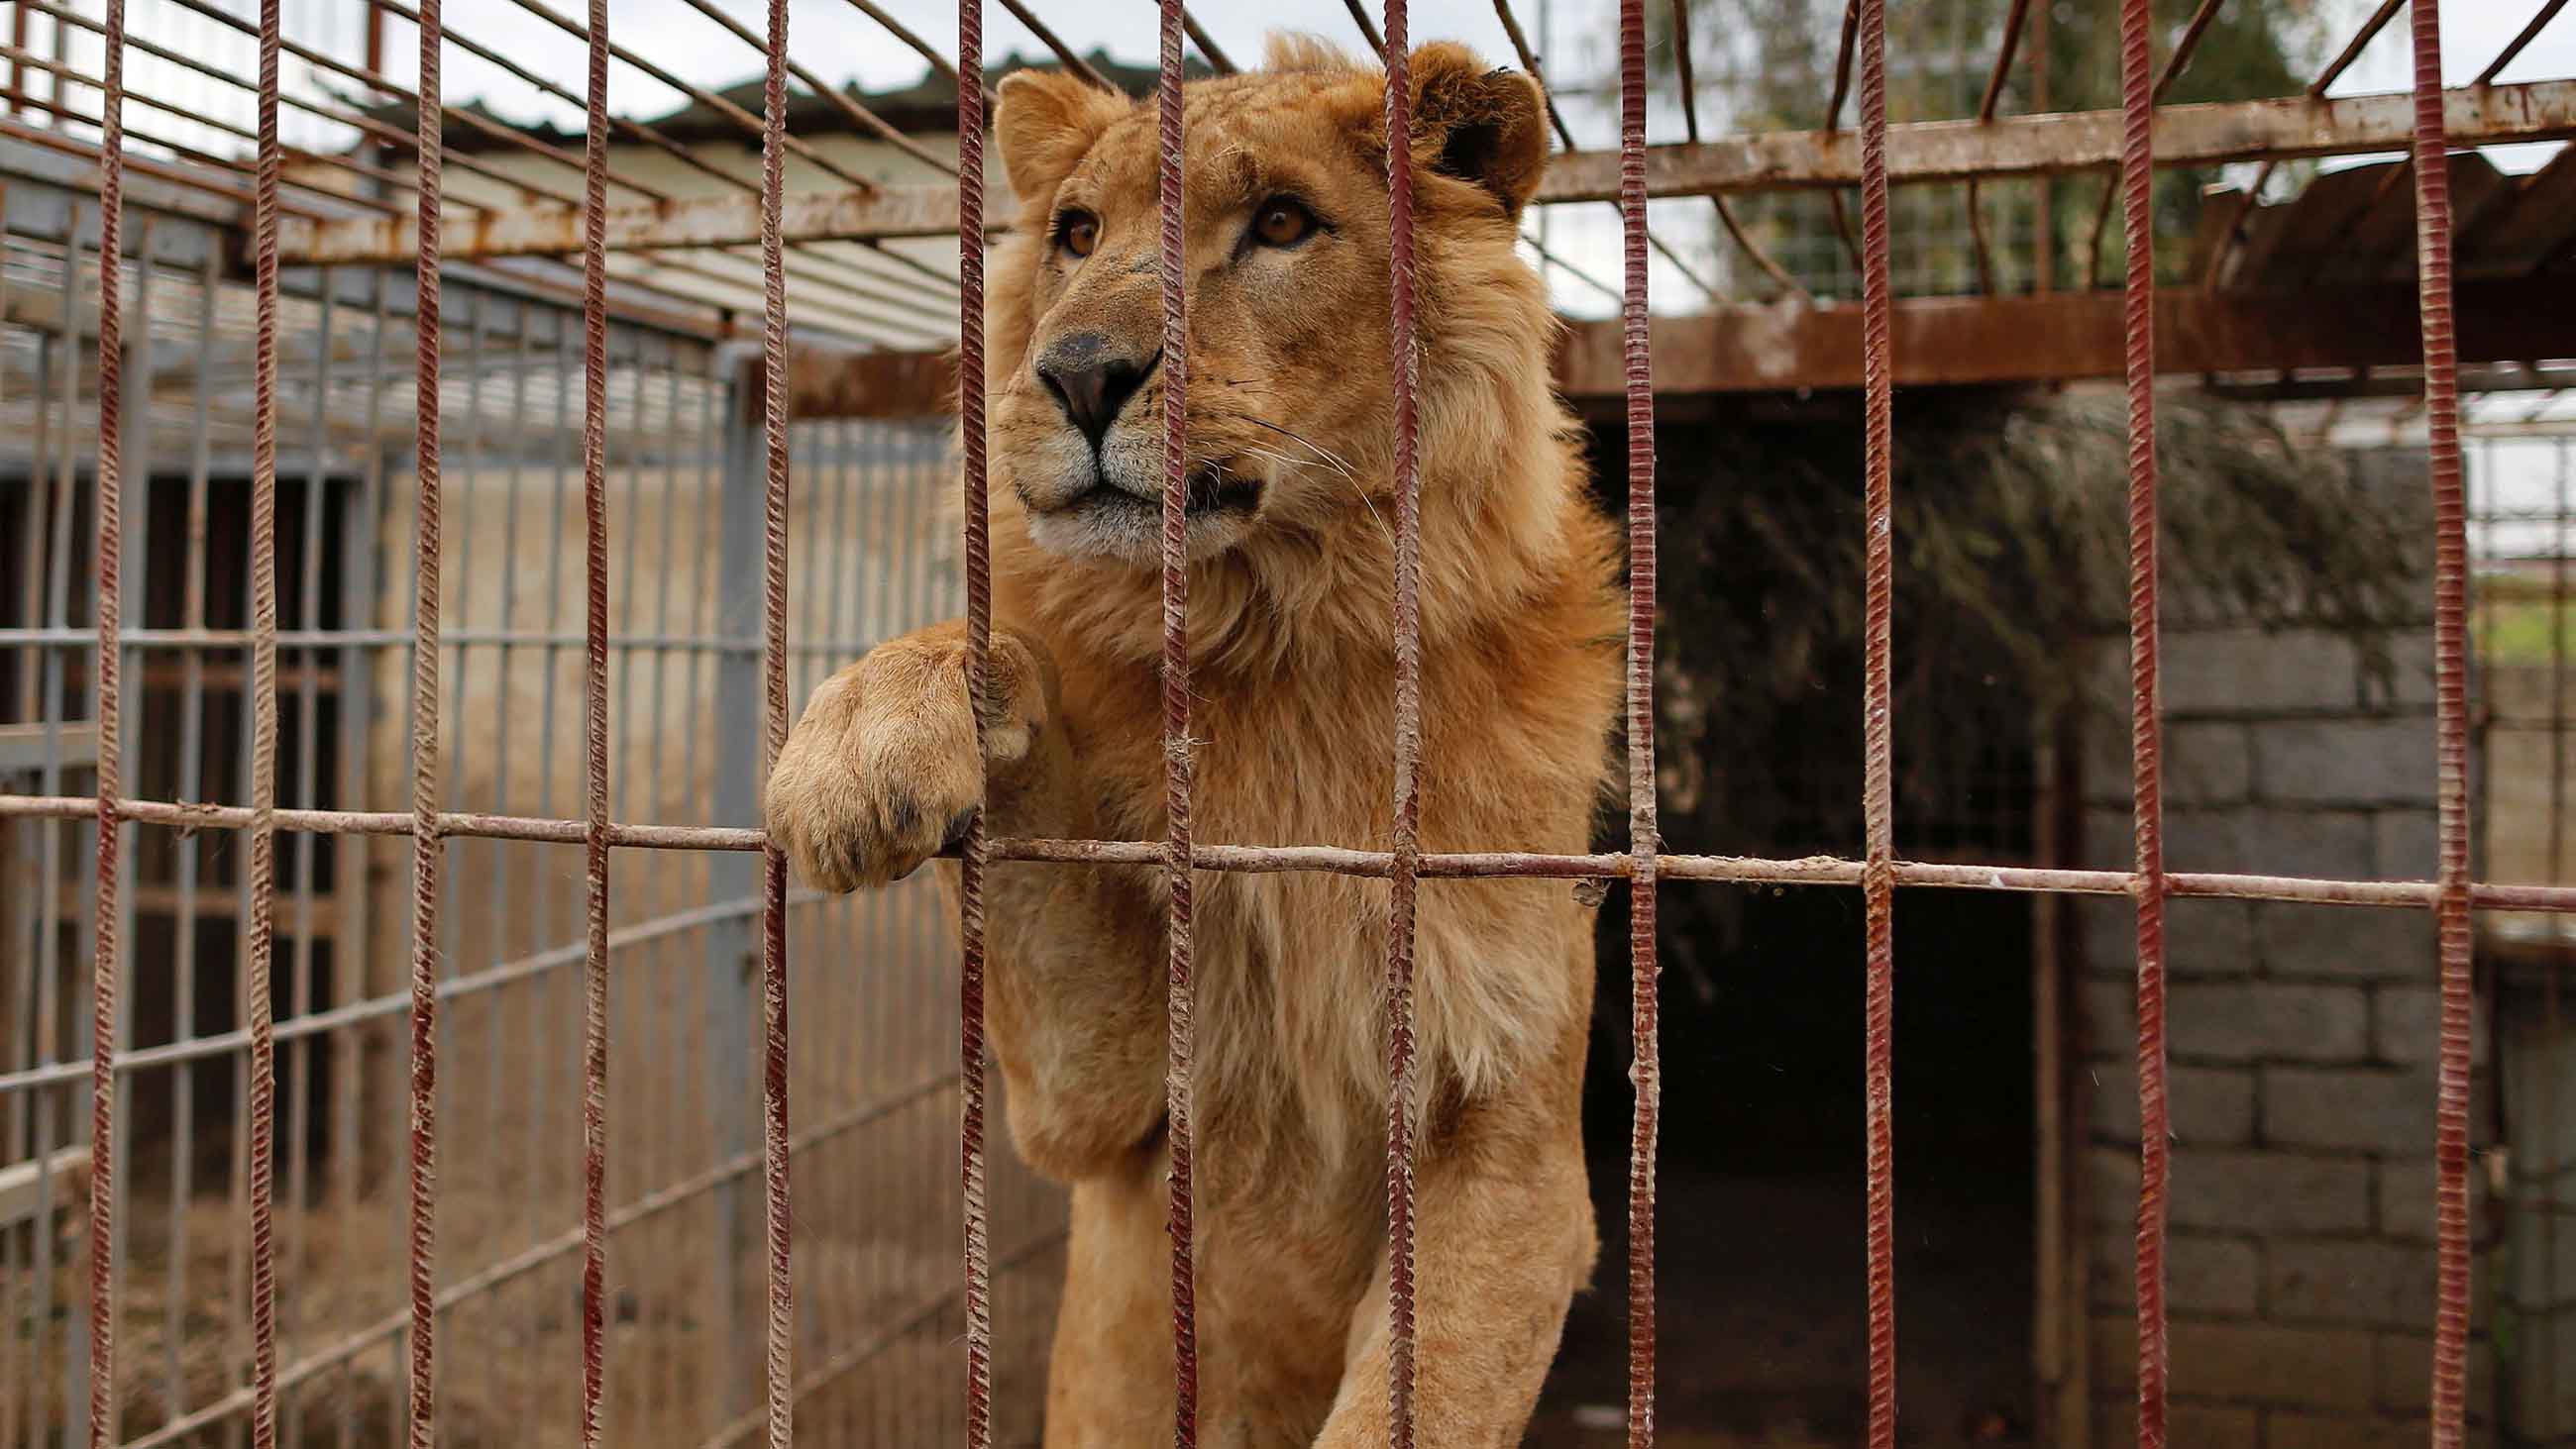 Most of the animals in the Mosul zoo were killed or died of starvation.